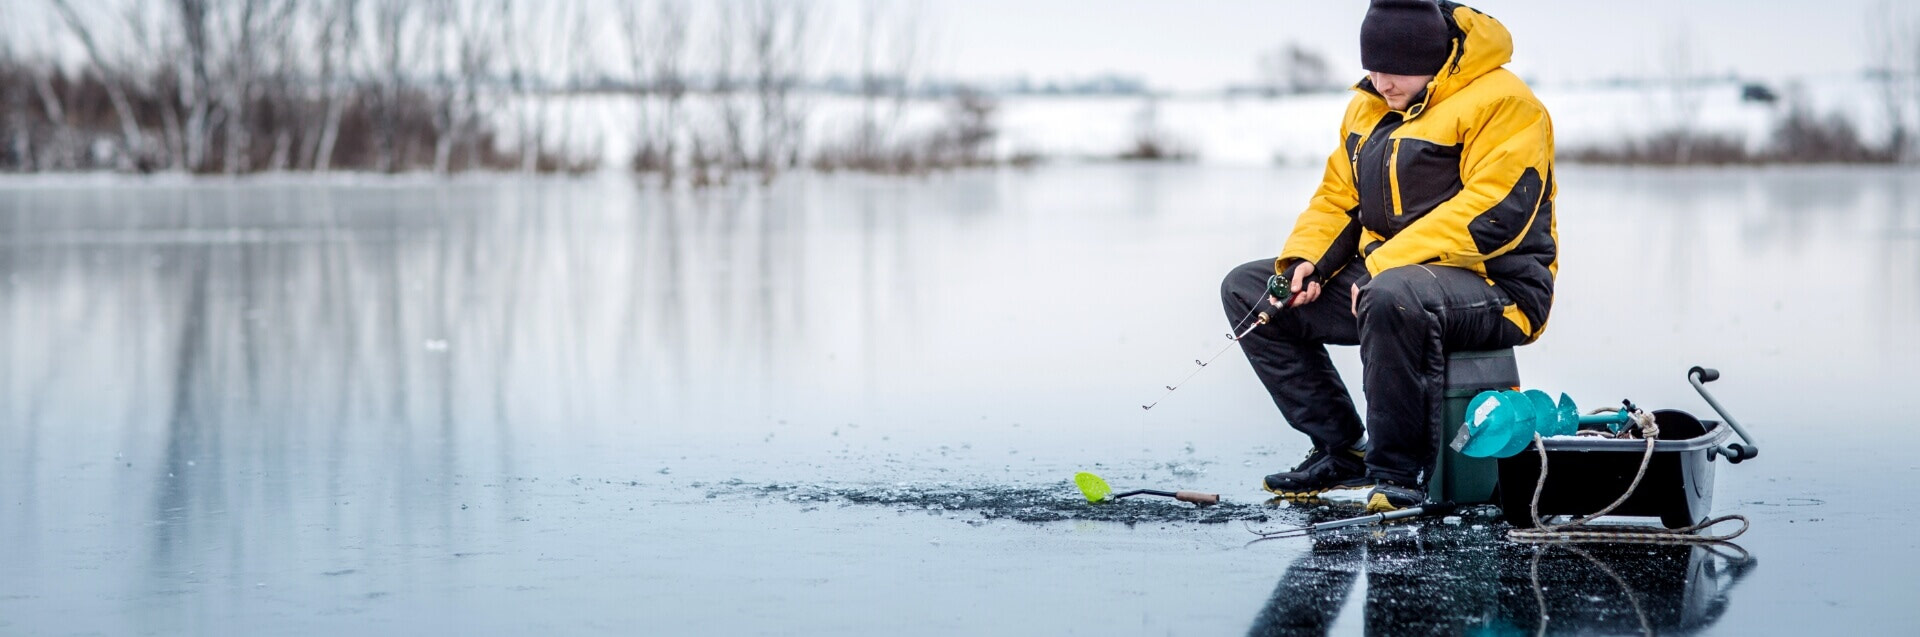 Embrace the Chill, Conquer the Ice.